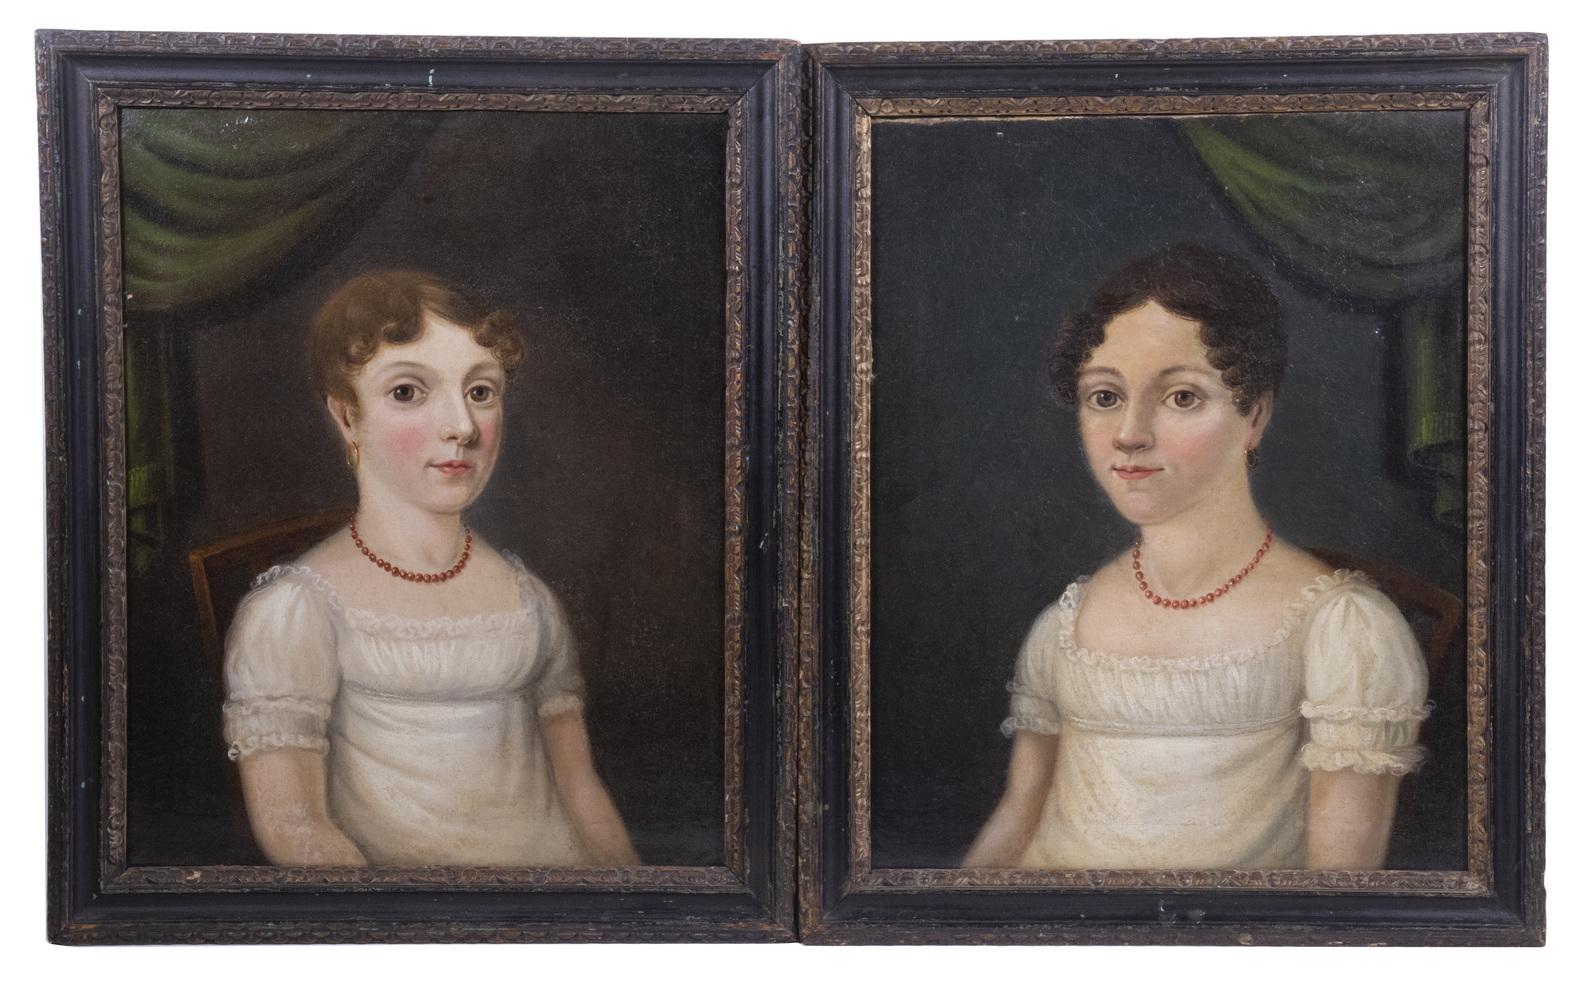 A RARE PAIR OF PORTRAIT PAINTINGS